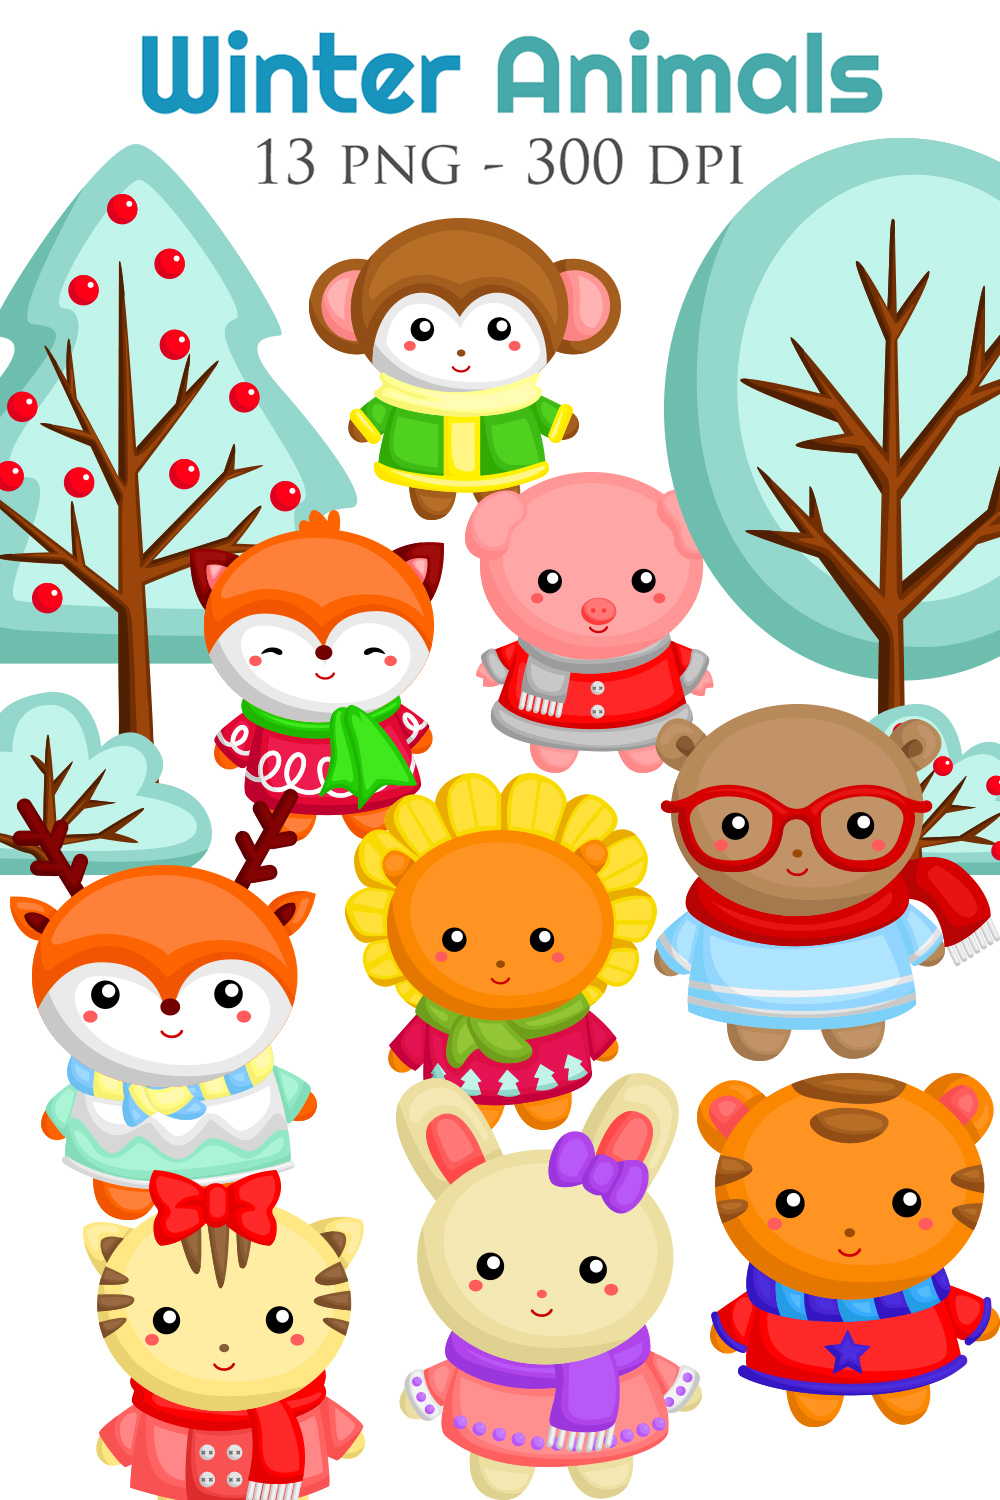 Cute and Funny Winter Animal Holiday Season Christmas Nature Monkey Rabbit Raindeer Tiger Cat Squirrel Fox Bear Cartoon Illustration Vector Clipart Sticker Background Decoration pinterest preview image.